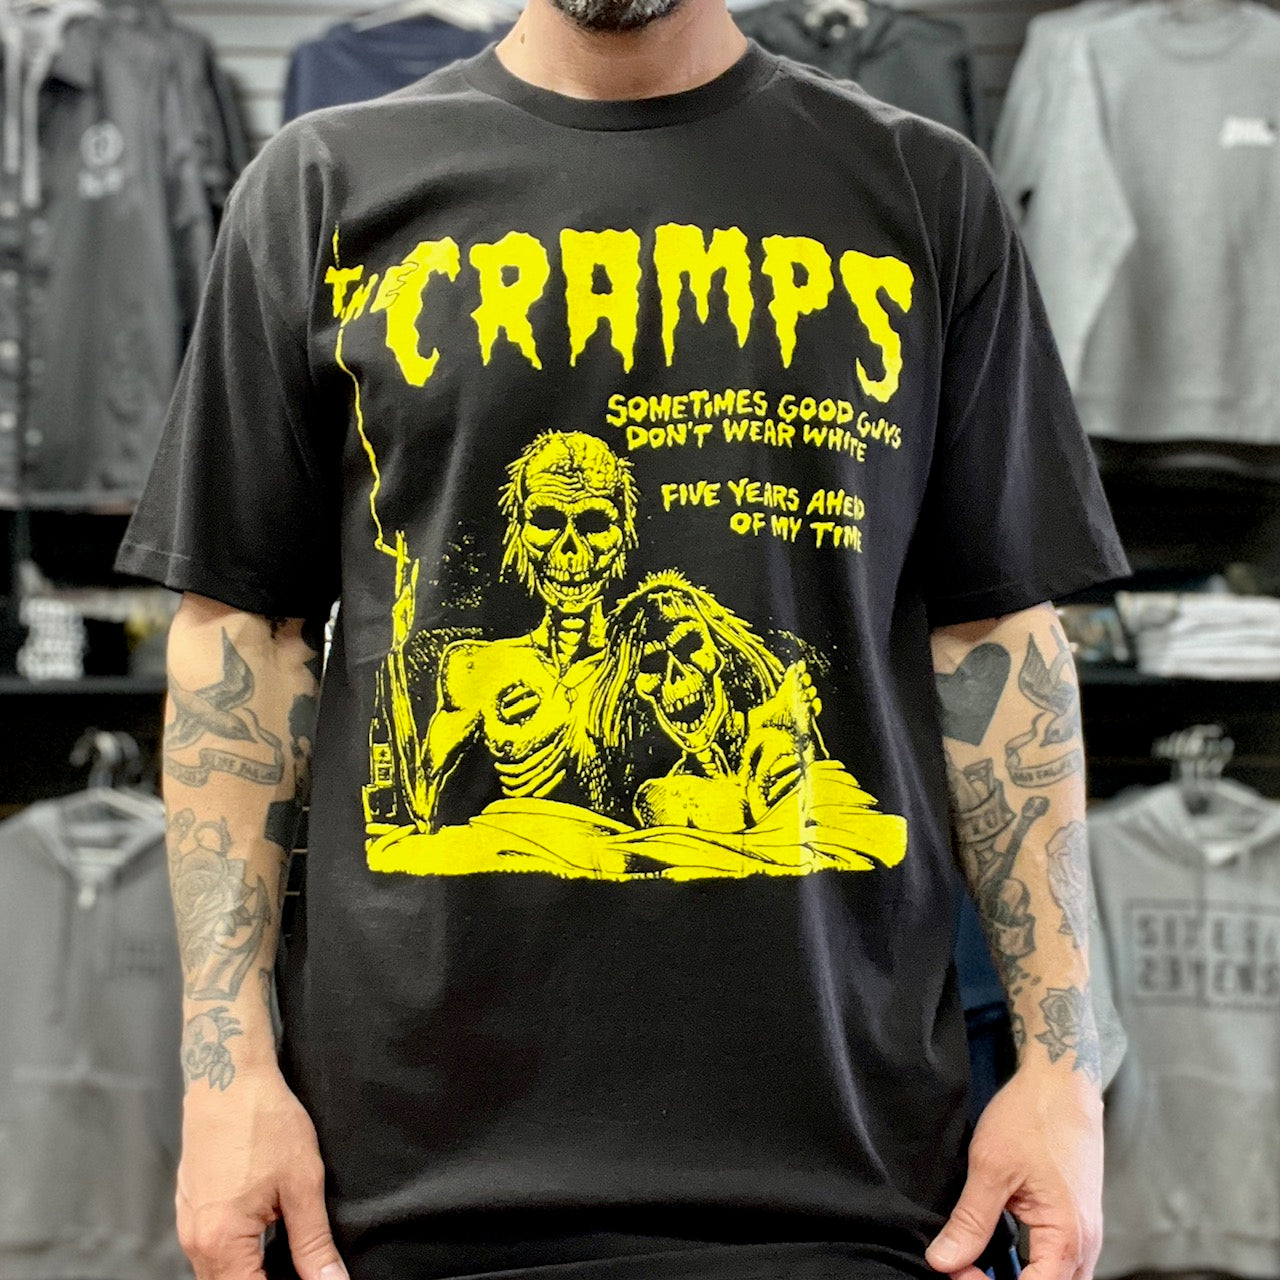 The Cramps T-Shirt - Five Years Ahead